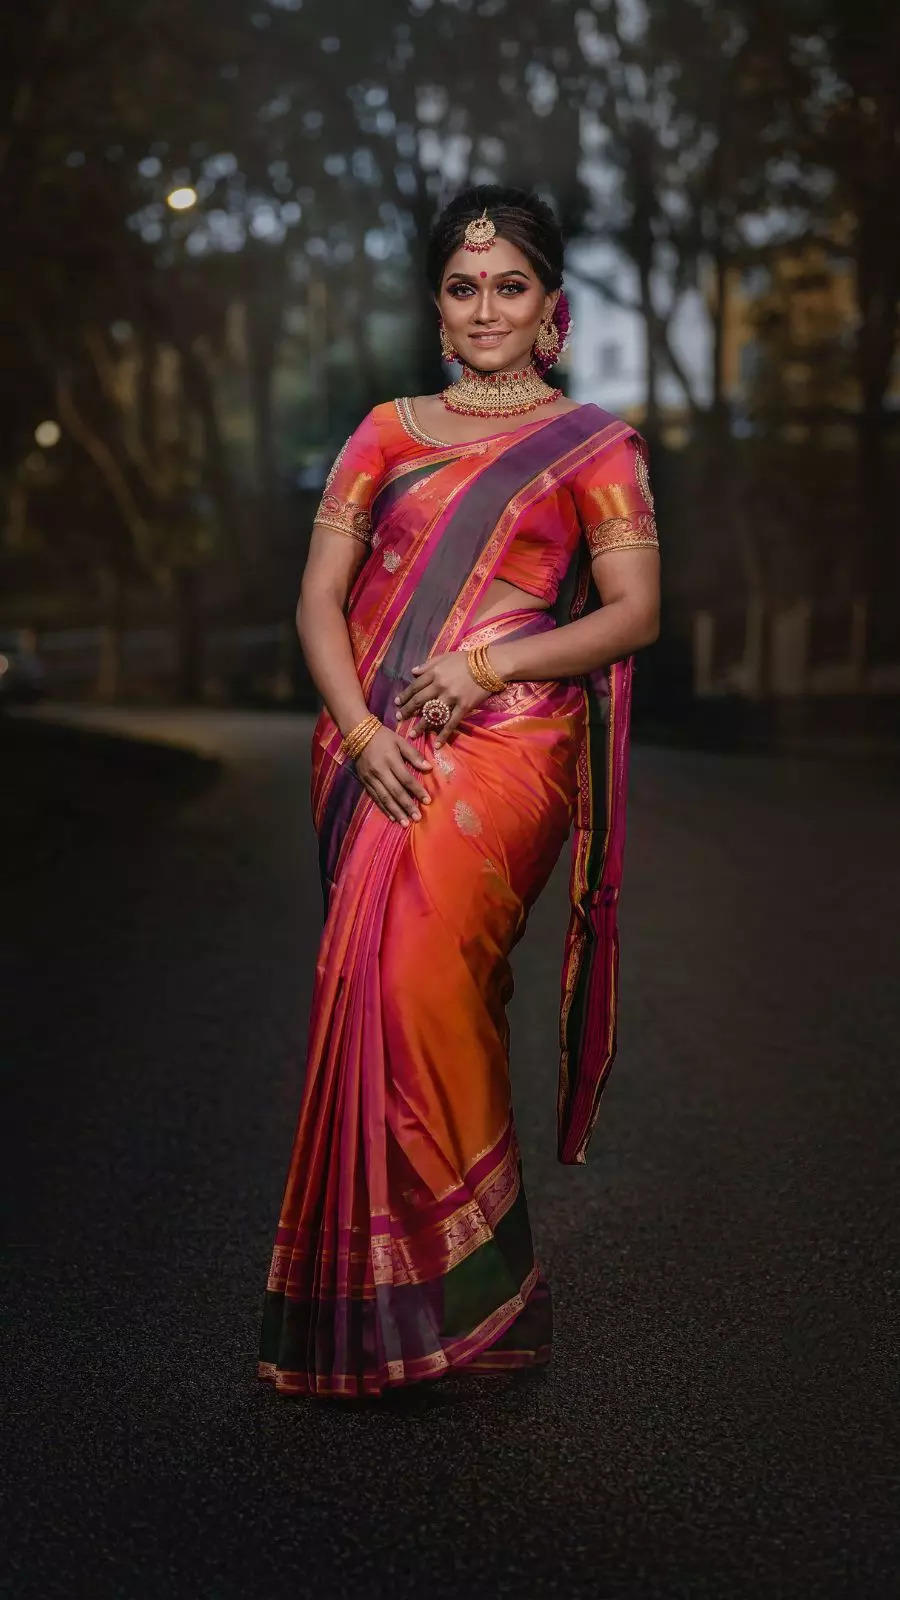 A Young Woman Posing in Her Traditional Saree Dress · Free Stock Photo-megaelearning.vn